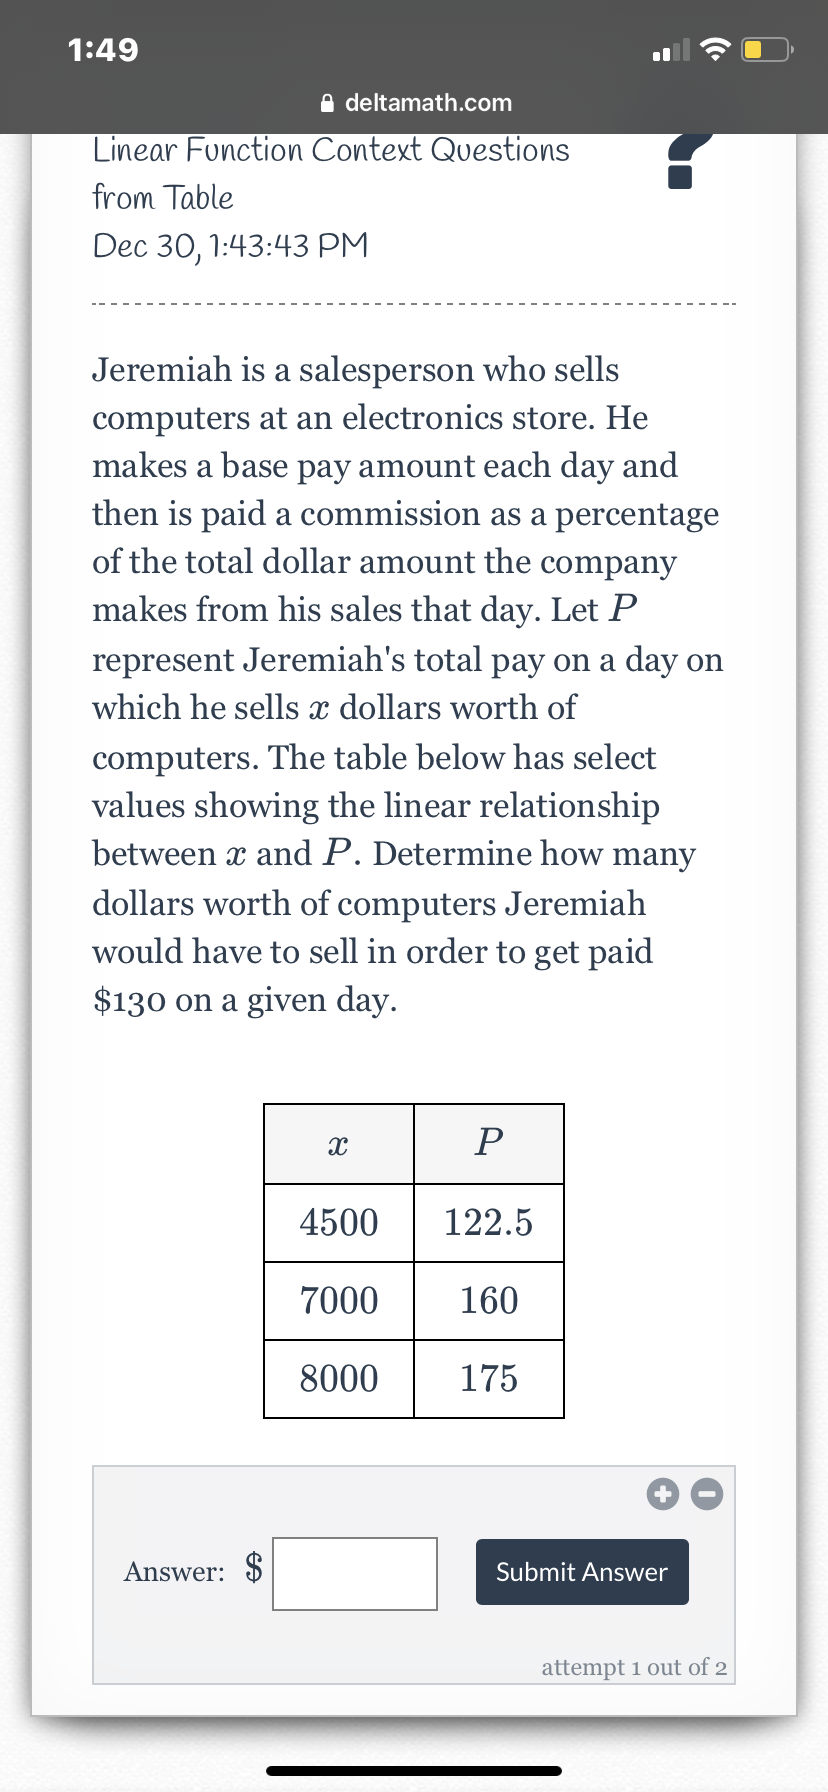 1:49
O deltamath.com
Linear Function Context Questions
from Table
Dec 30, 1:43:43 РМ
Jeremiah is a salesperson who sells
computers at an electronics store. He
makes a base pay amount each day and
then is paid a commission as a percentage
of the total dollar amount the company
makes from his sales that day. Let P
represent Jeremiah's total pay on a day on
which he sells x dollars worth of
computers. The table below has select
values showing the linear relationship
between x and P. Determine how many
dollars worth of computers Jeremiah
would have to sell in order to get paid
$130 on a given day.
P
4500
122.5
7000
160
8000
175
Answer: $
Submit Answer
attempt 1 out of 2
